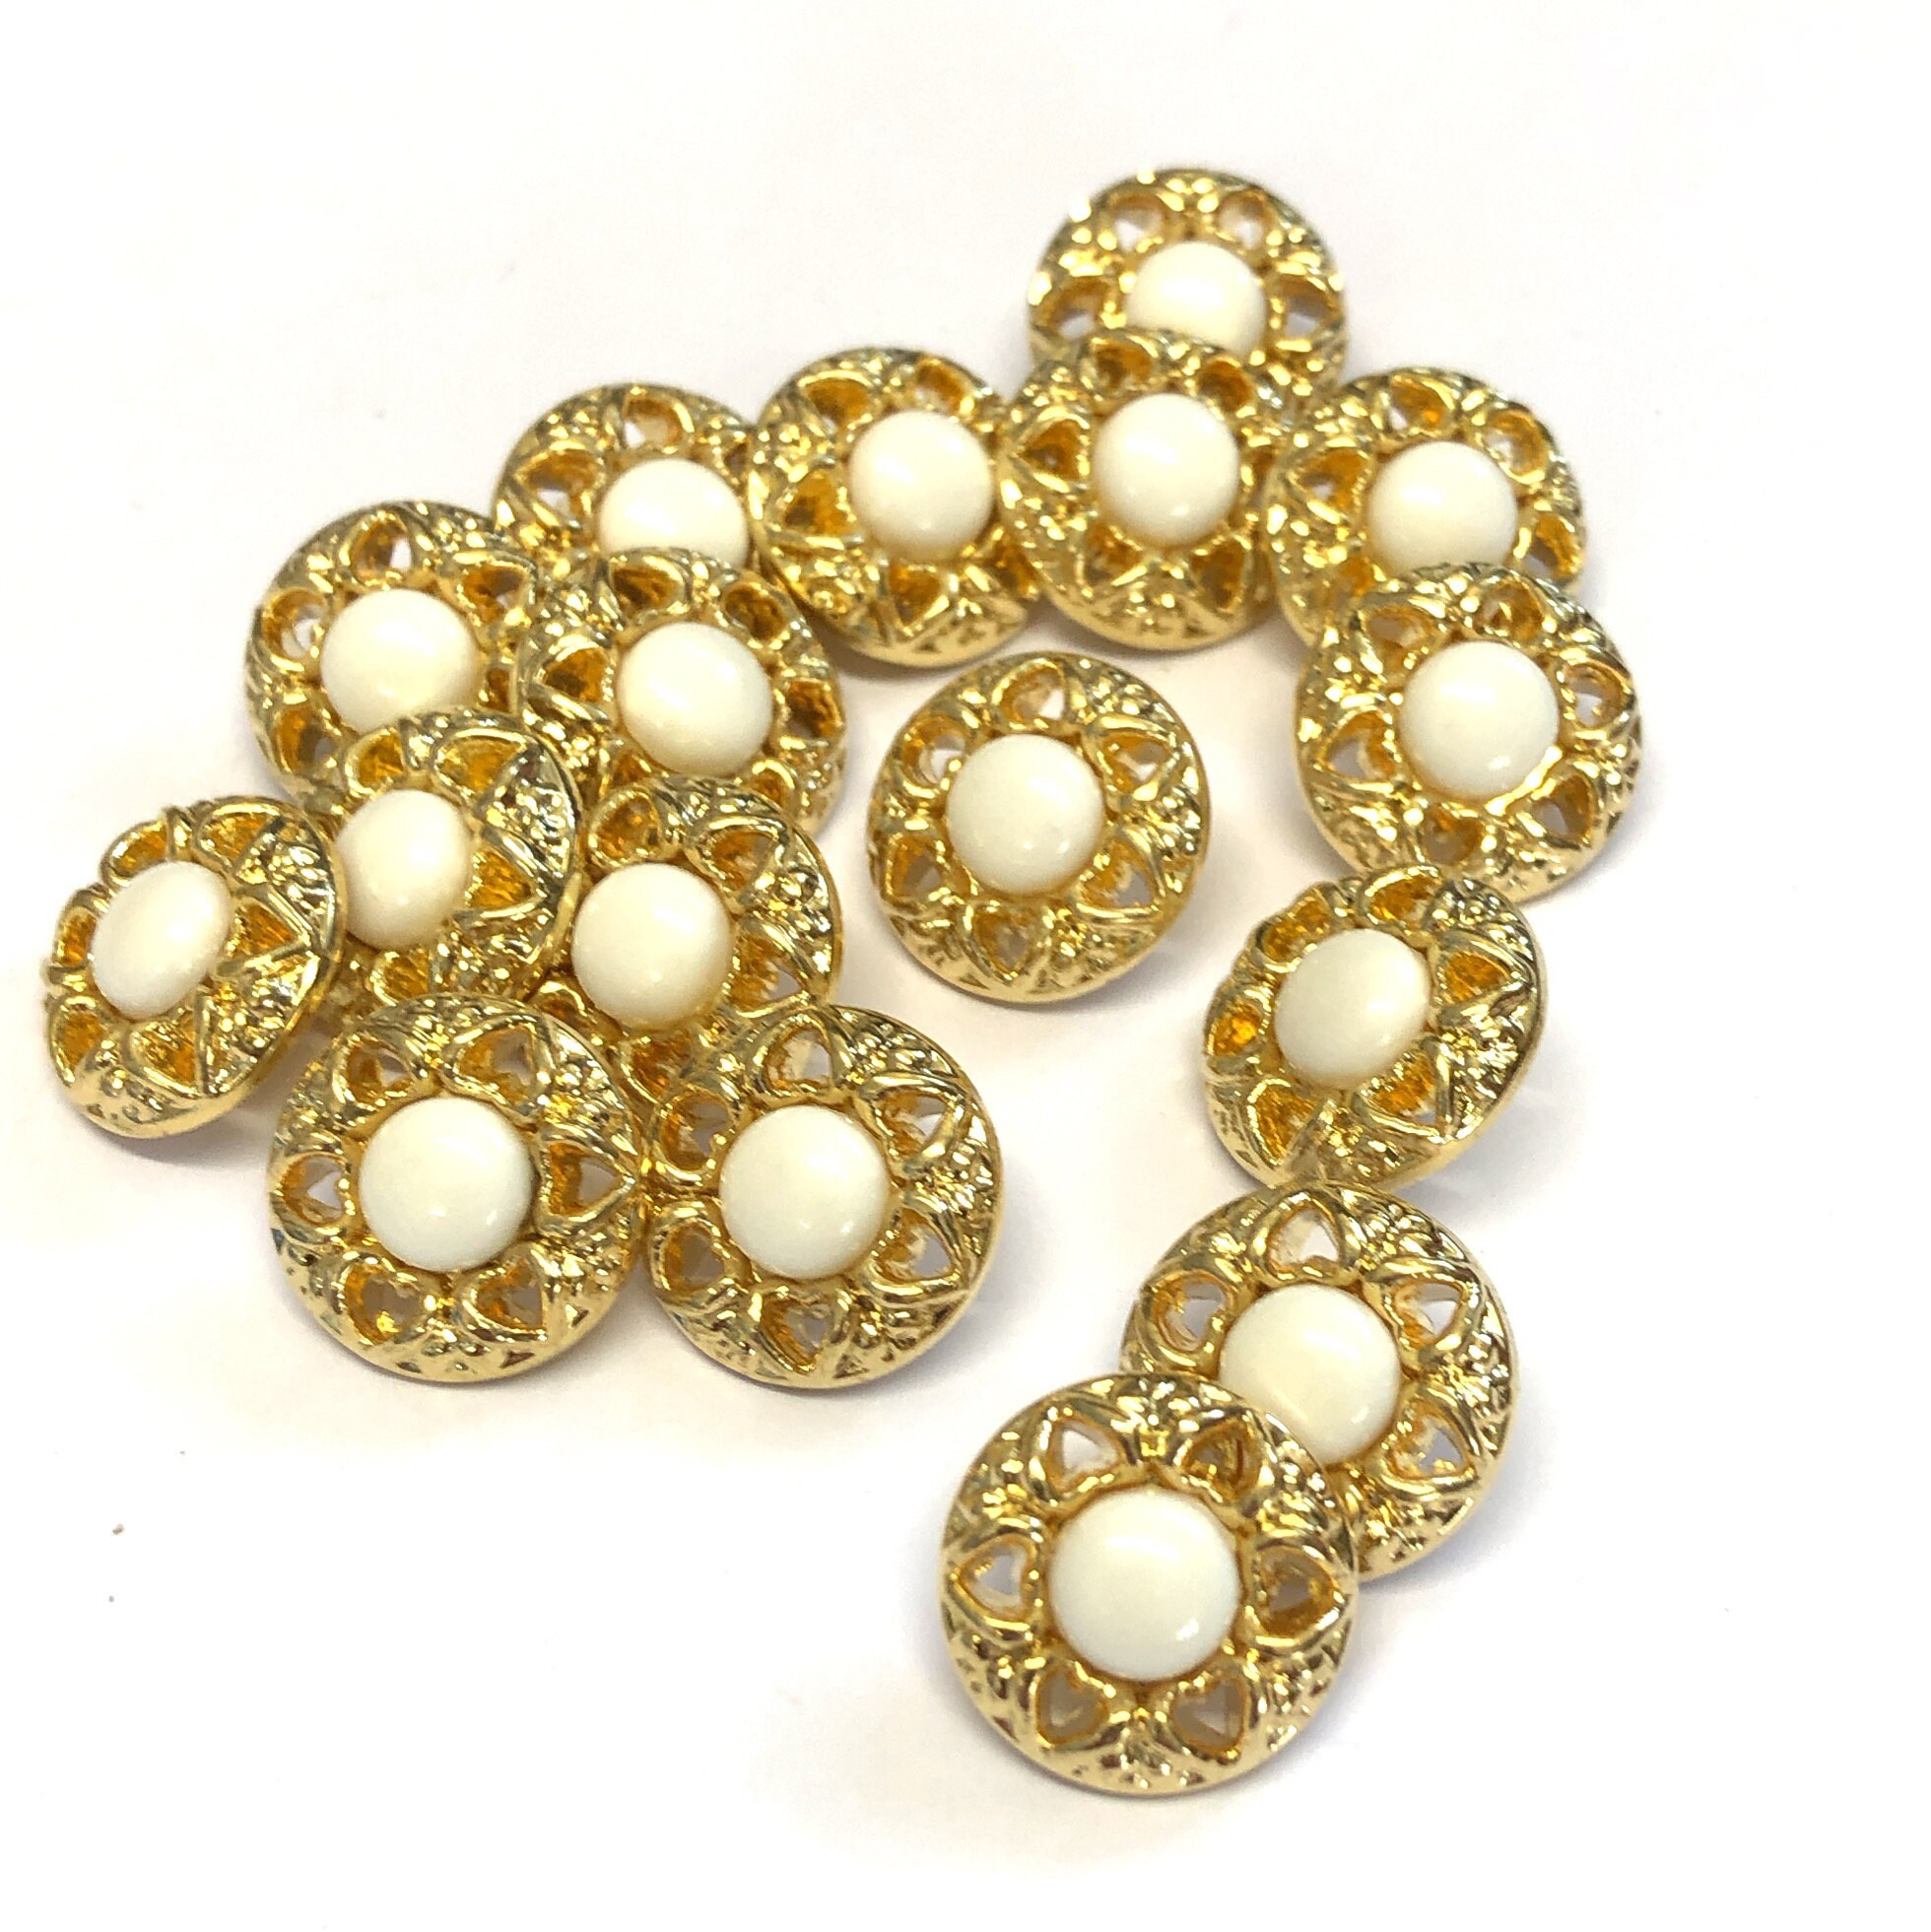 10, Pearl Resin and Gold Metallic Buttons, Fancy Buttons, Gold Decorative  Buttons, Ivory Shank Buttons, Gold Buttons, 15mm Buttons -  UK